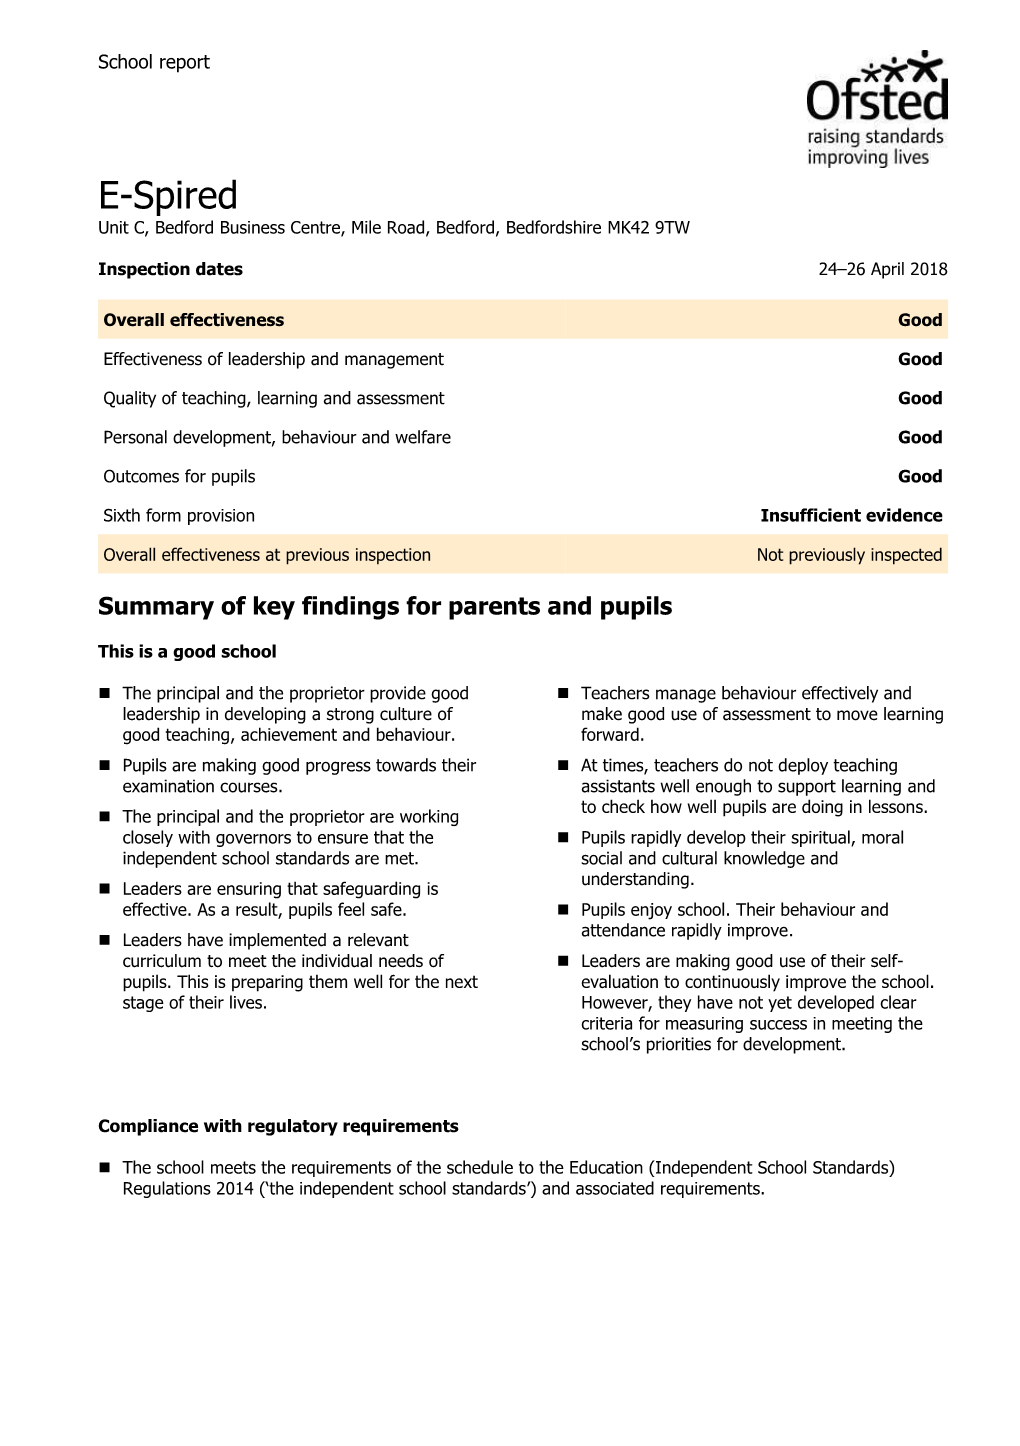 Ofsted Report April 2018